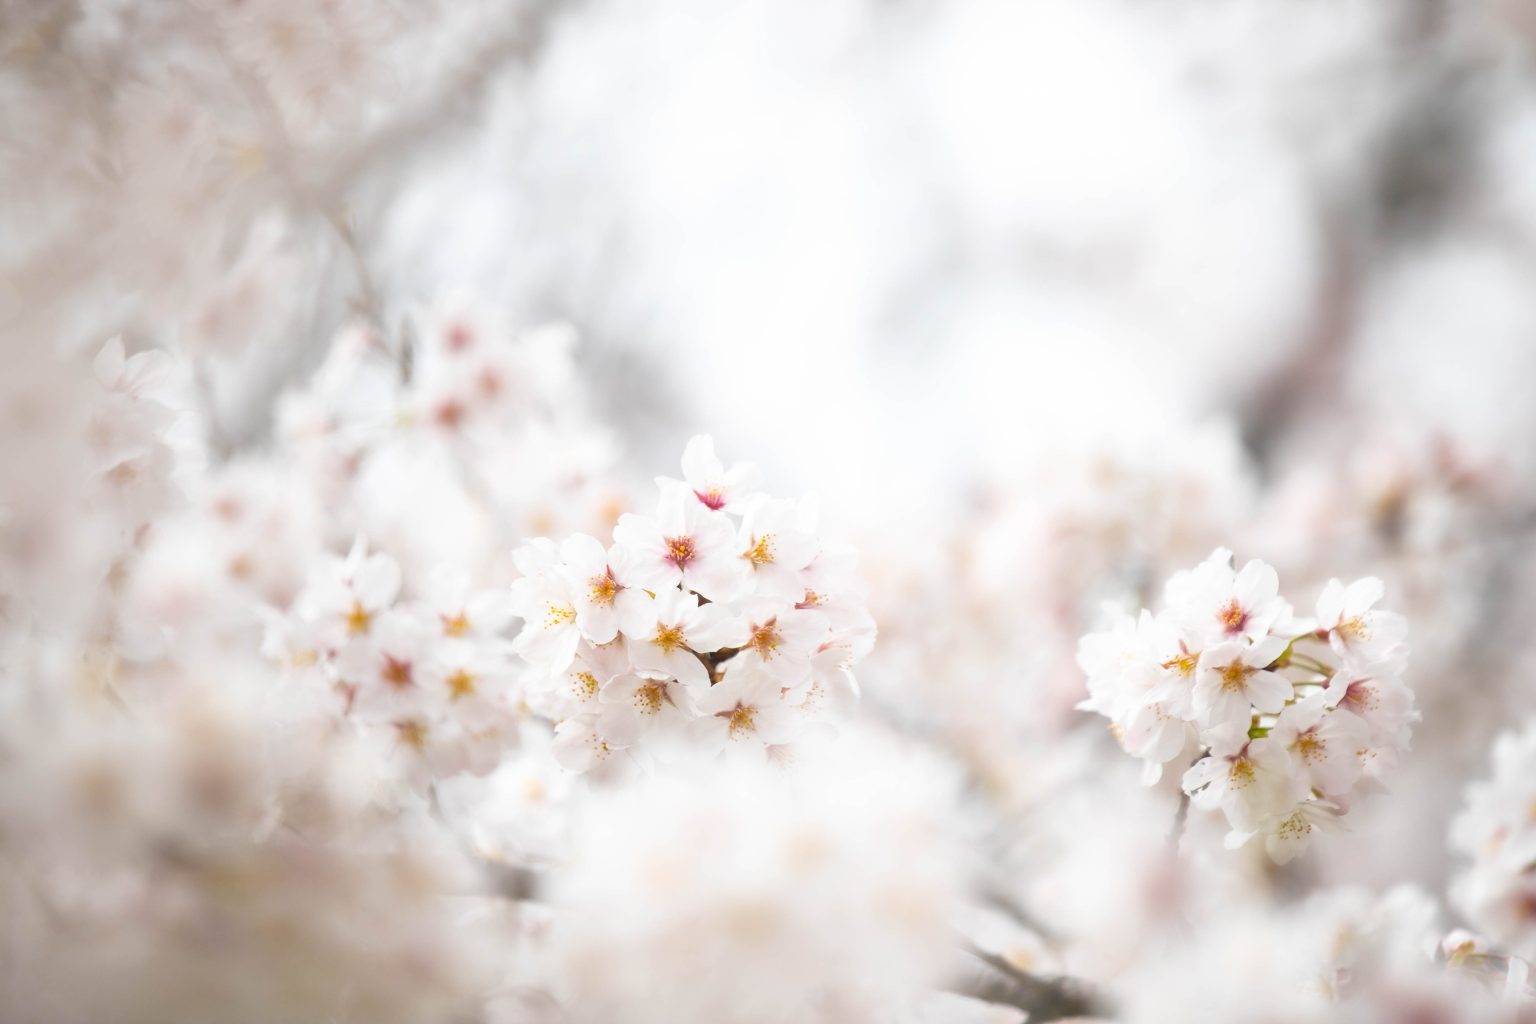 White cherry blossoms blooming on a blurred background. Photo contributed to the WordPress Photo Directory by Kanta.